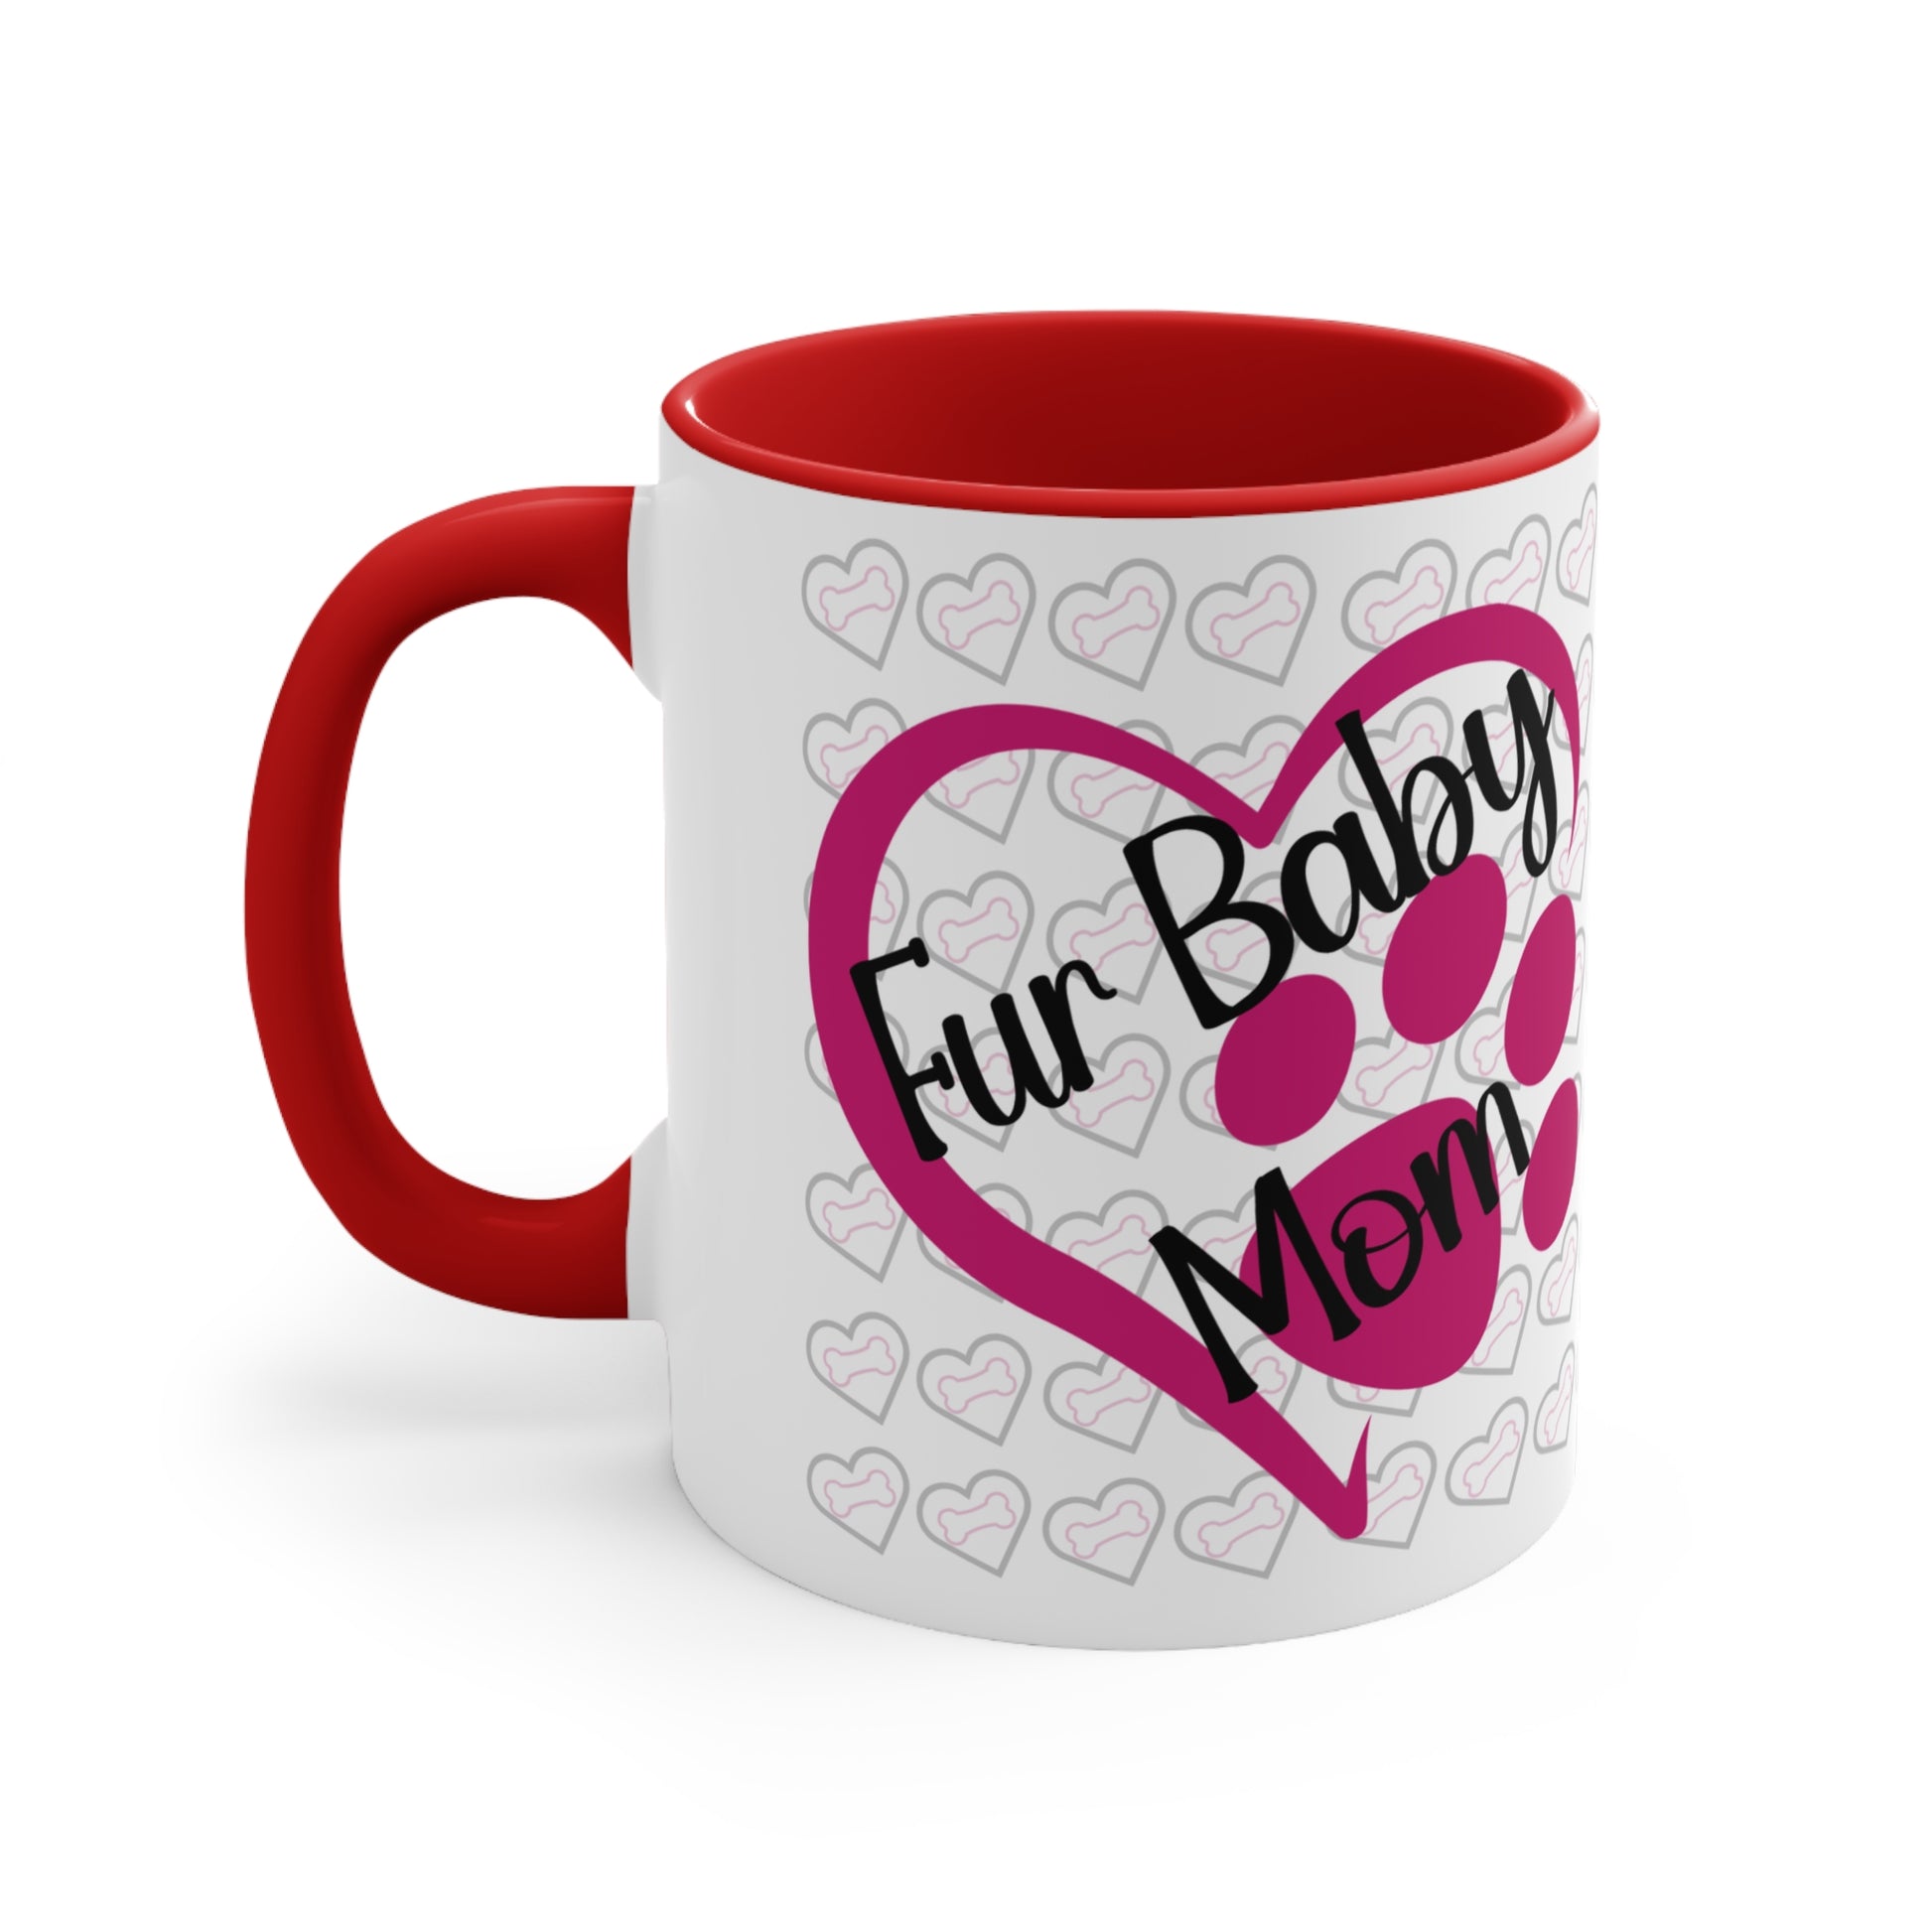 Fur baby mom coffee mug with pink heart and paw print 11 oz, back view in red.